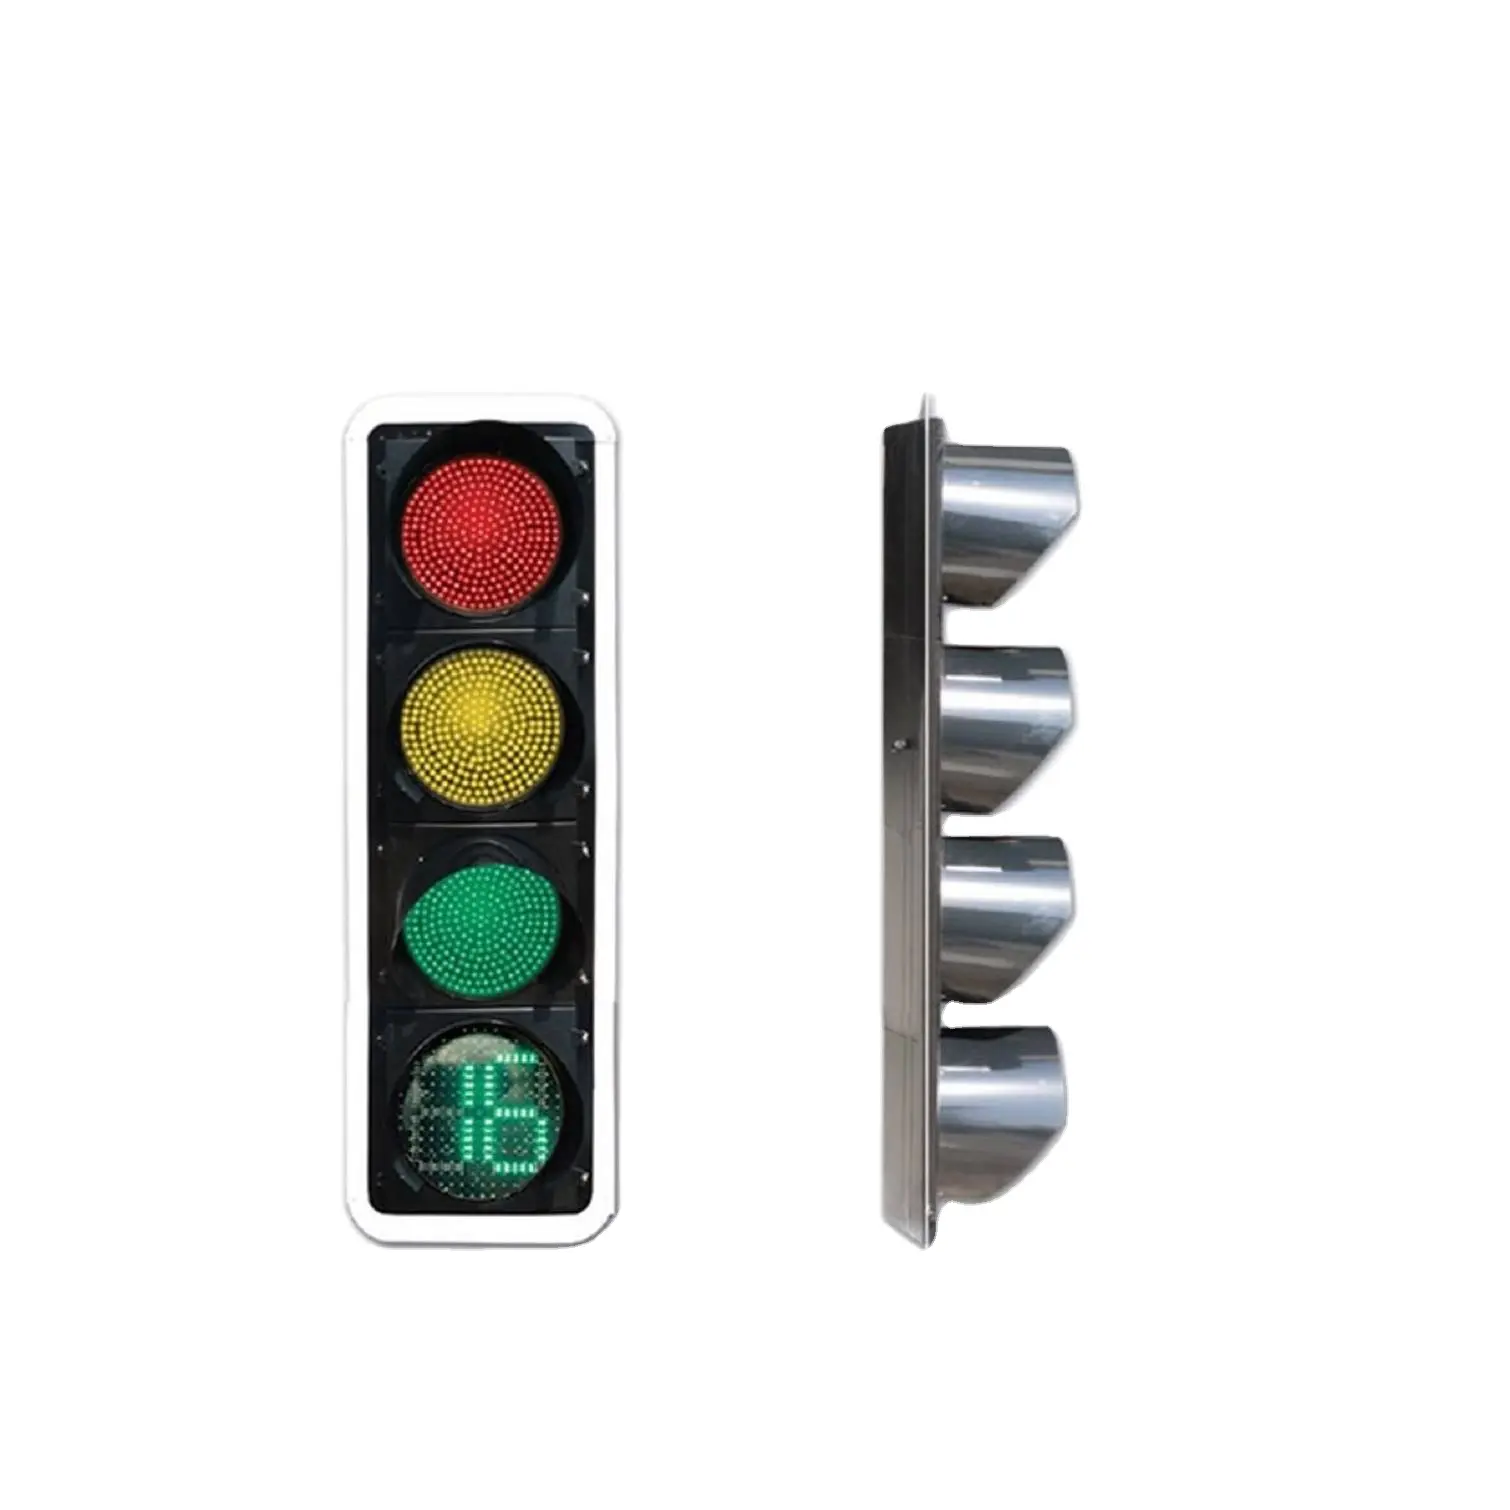 Intelligent LED Traffic Signal Light with Countdown Timer Module